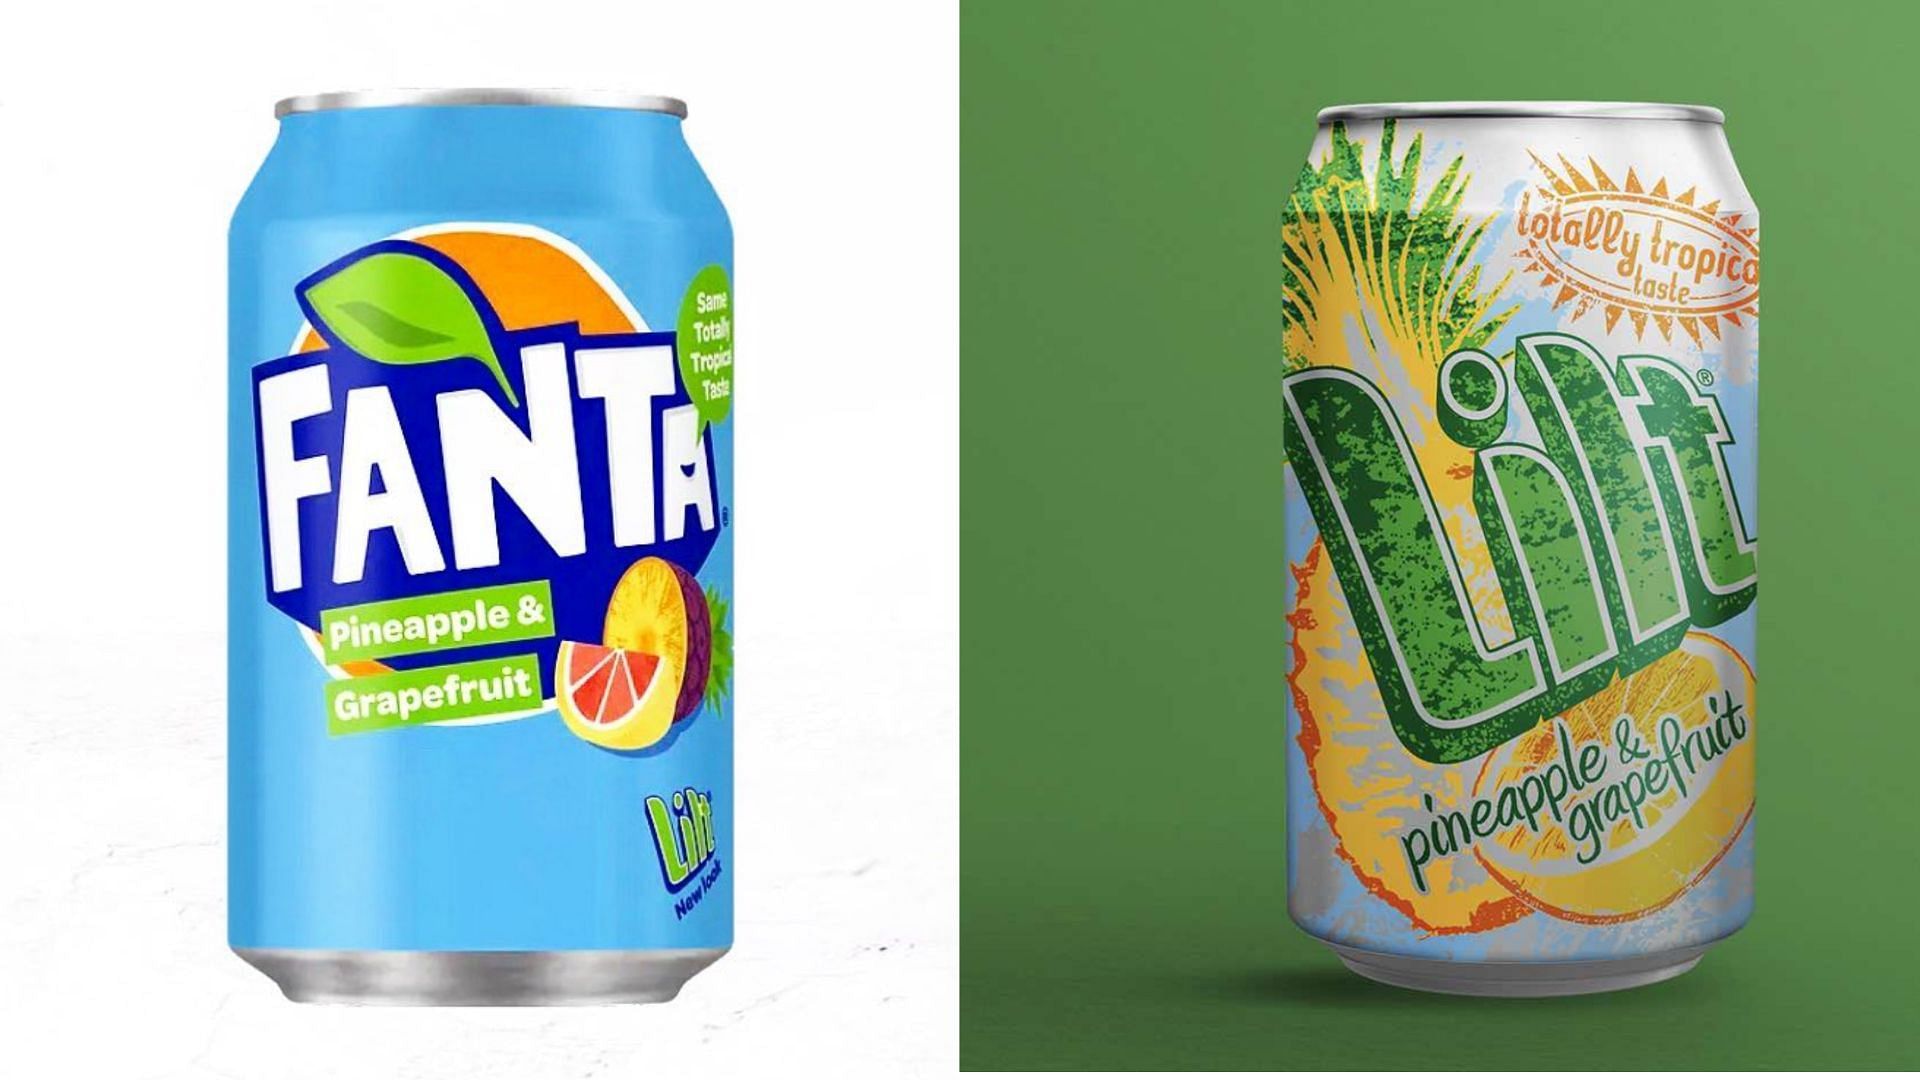 Lilt Soda will now be available in a new avatar as Fanta Pineapple & Grapefruit soda, featuring the same nostalgic flavors (Image via Coca-Cola)